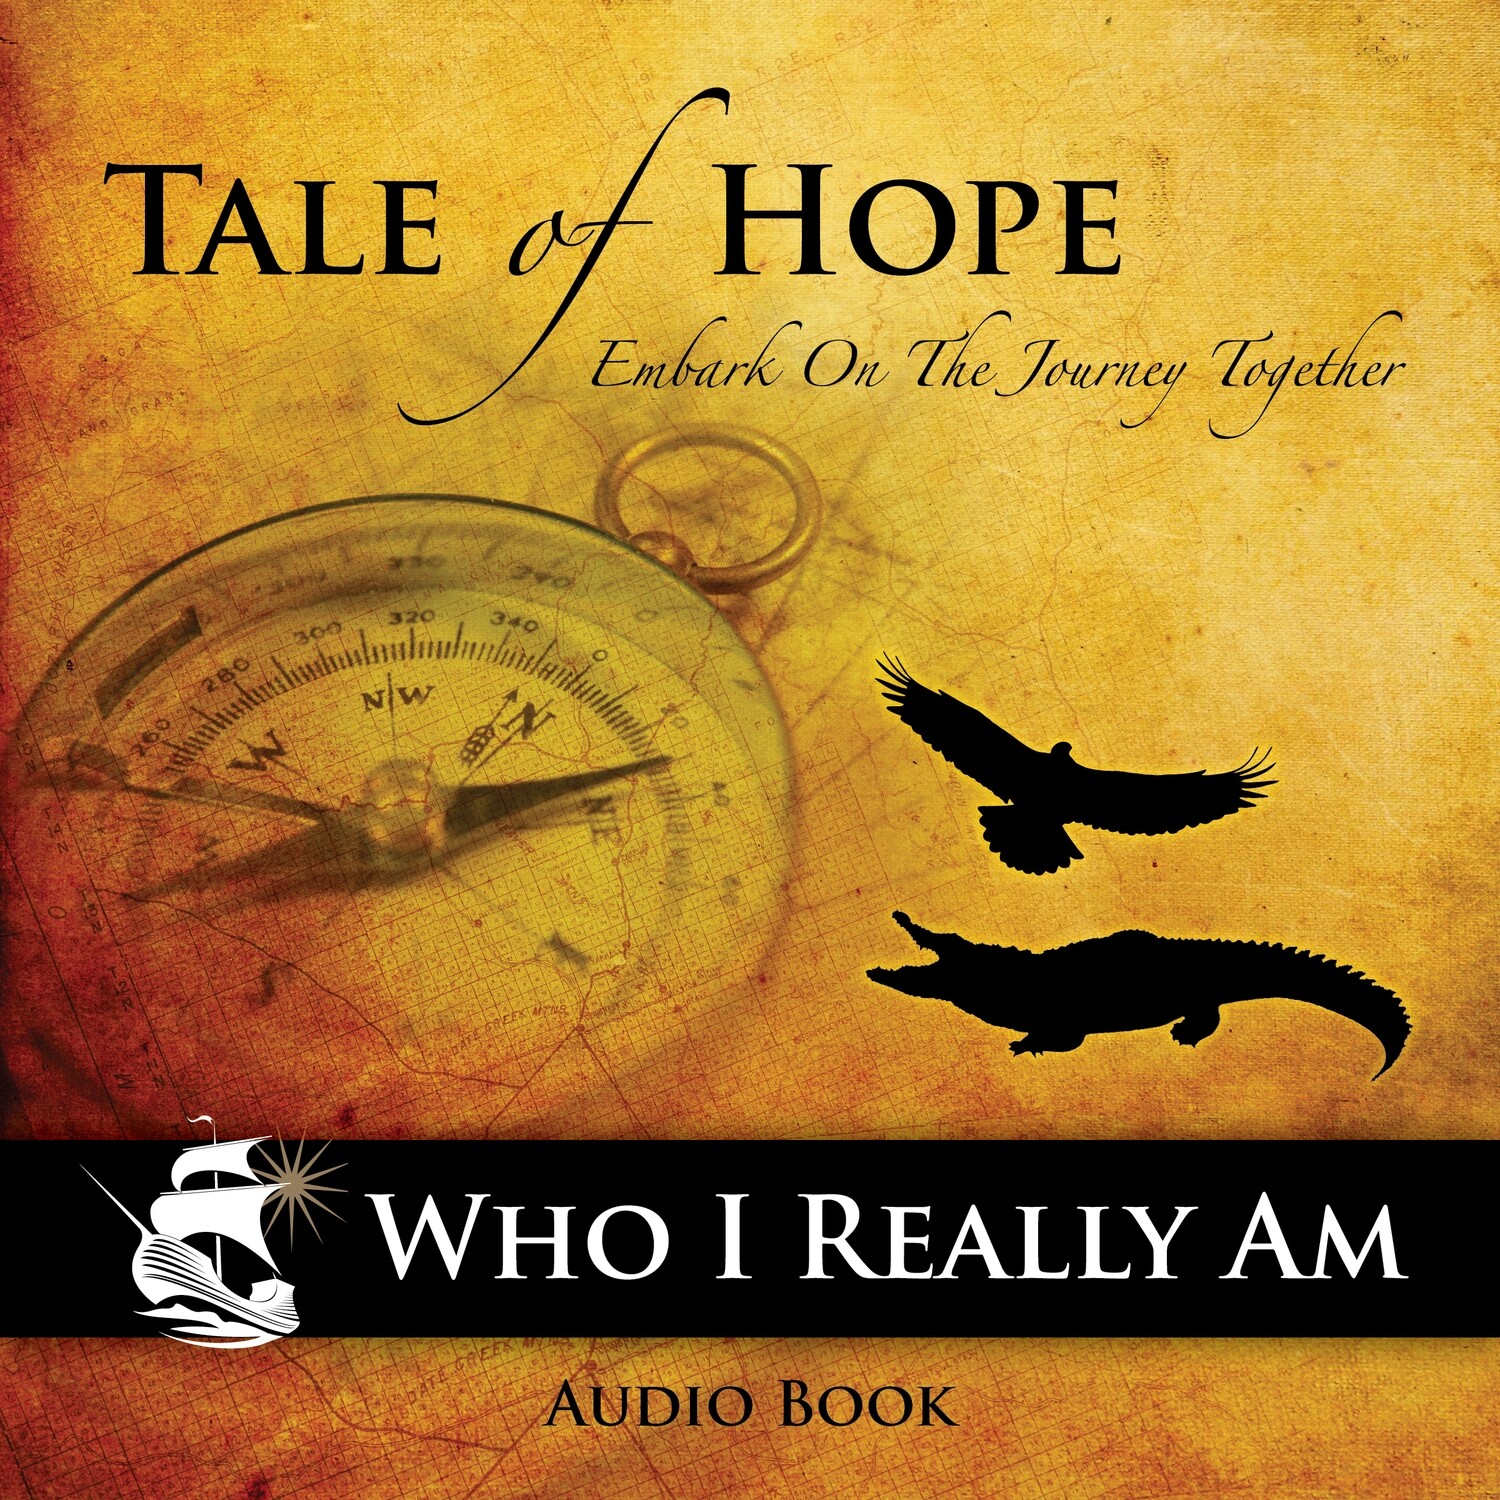 Tale of Hope - Embark on the Journey Introdution